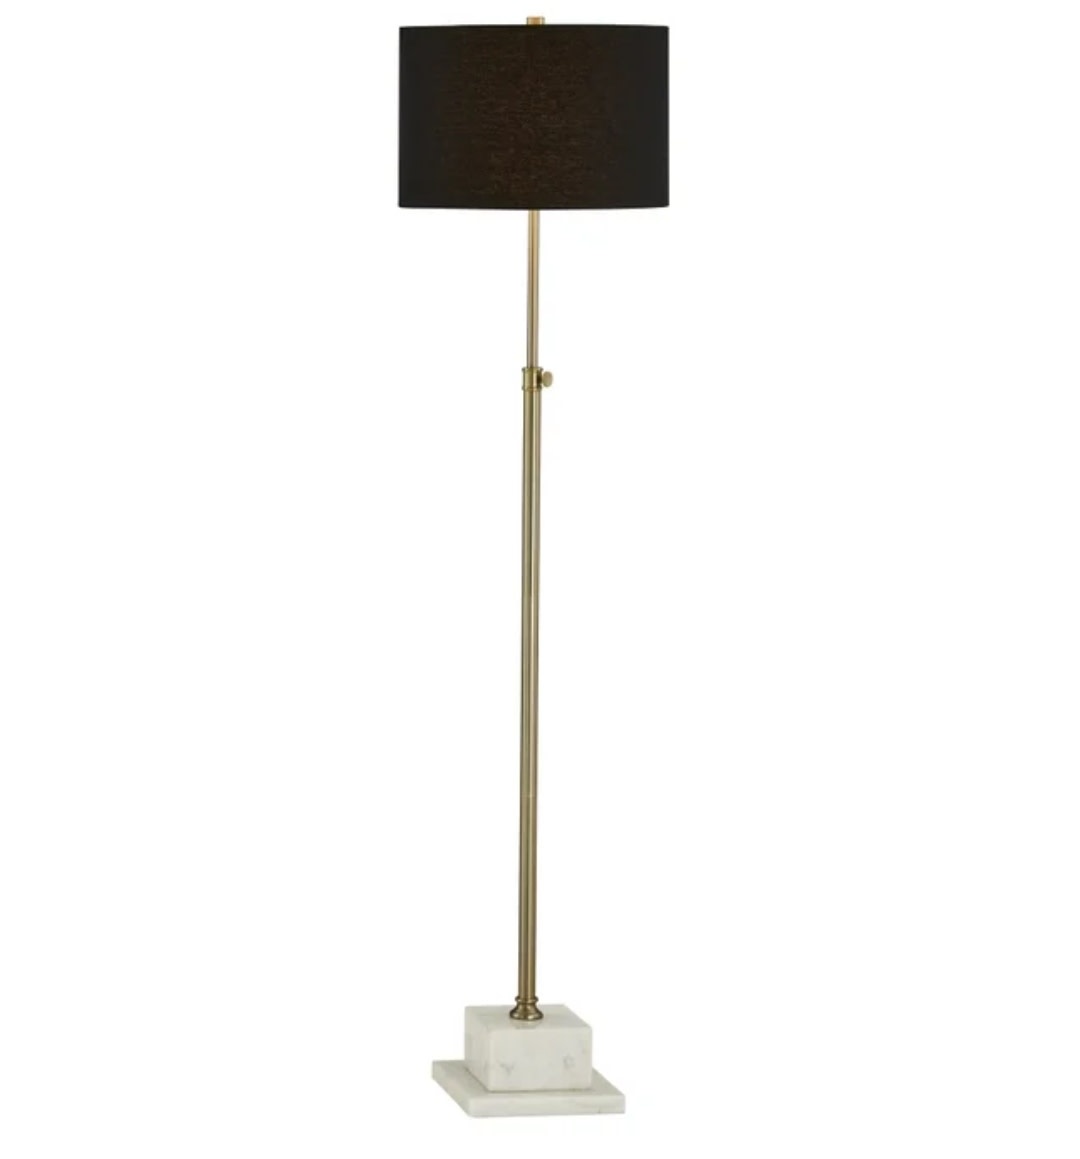 Miranda Floor Lamp, 61.5h, Available for local pick up